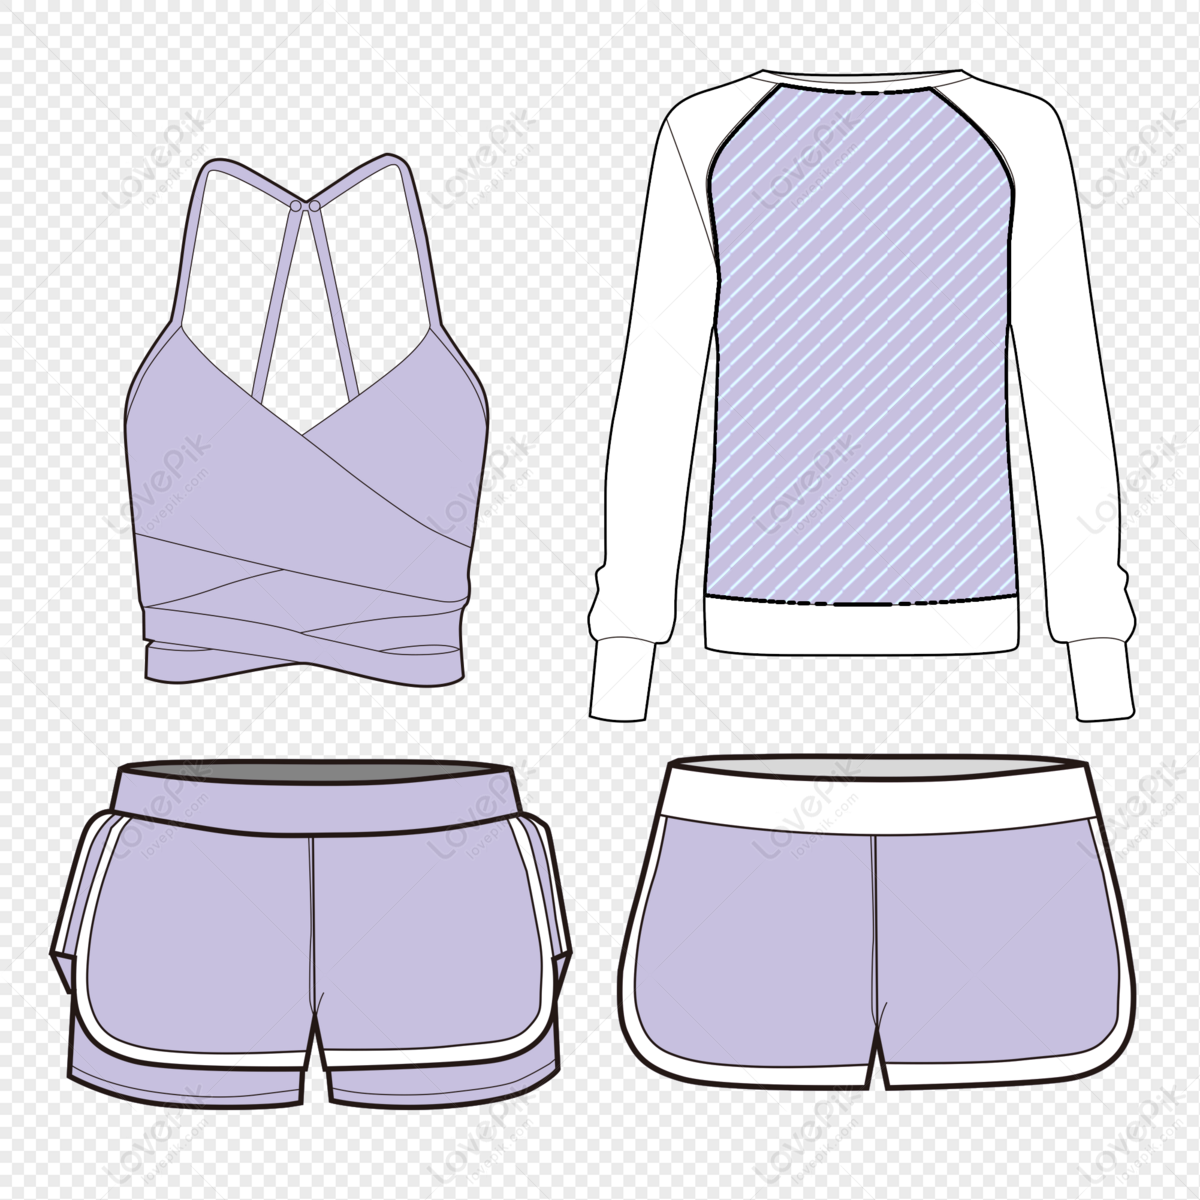 Black And White Simple Sportswear, Gray White, Light White, Black Light PNG  Hd Transparent Image And Clipart Image For Free Download - Lovepik